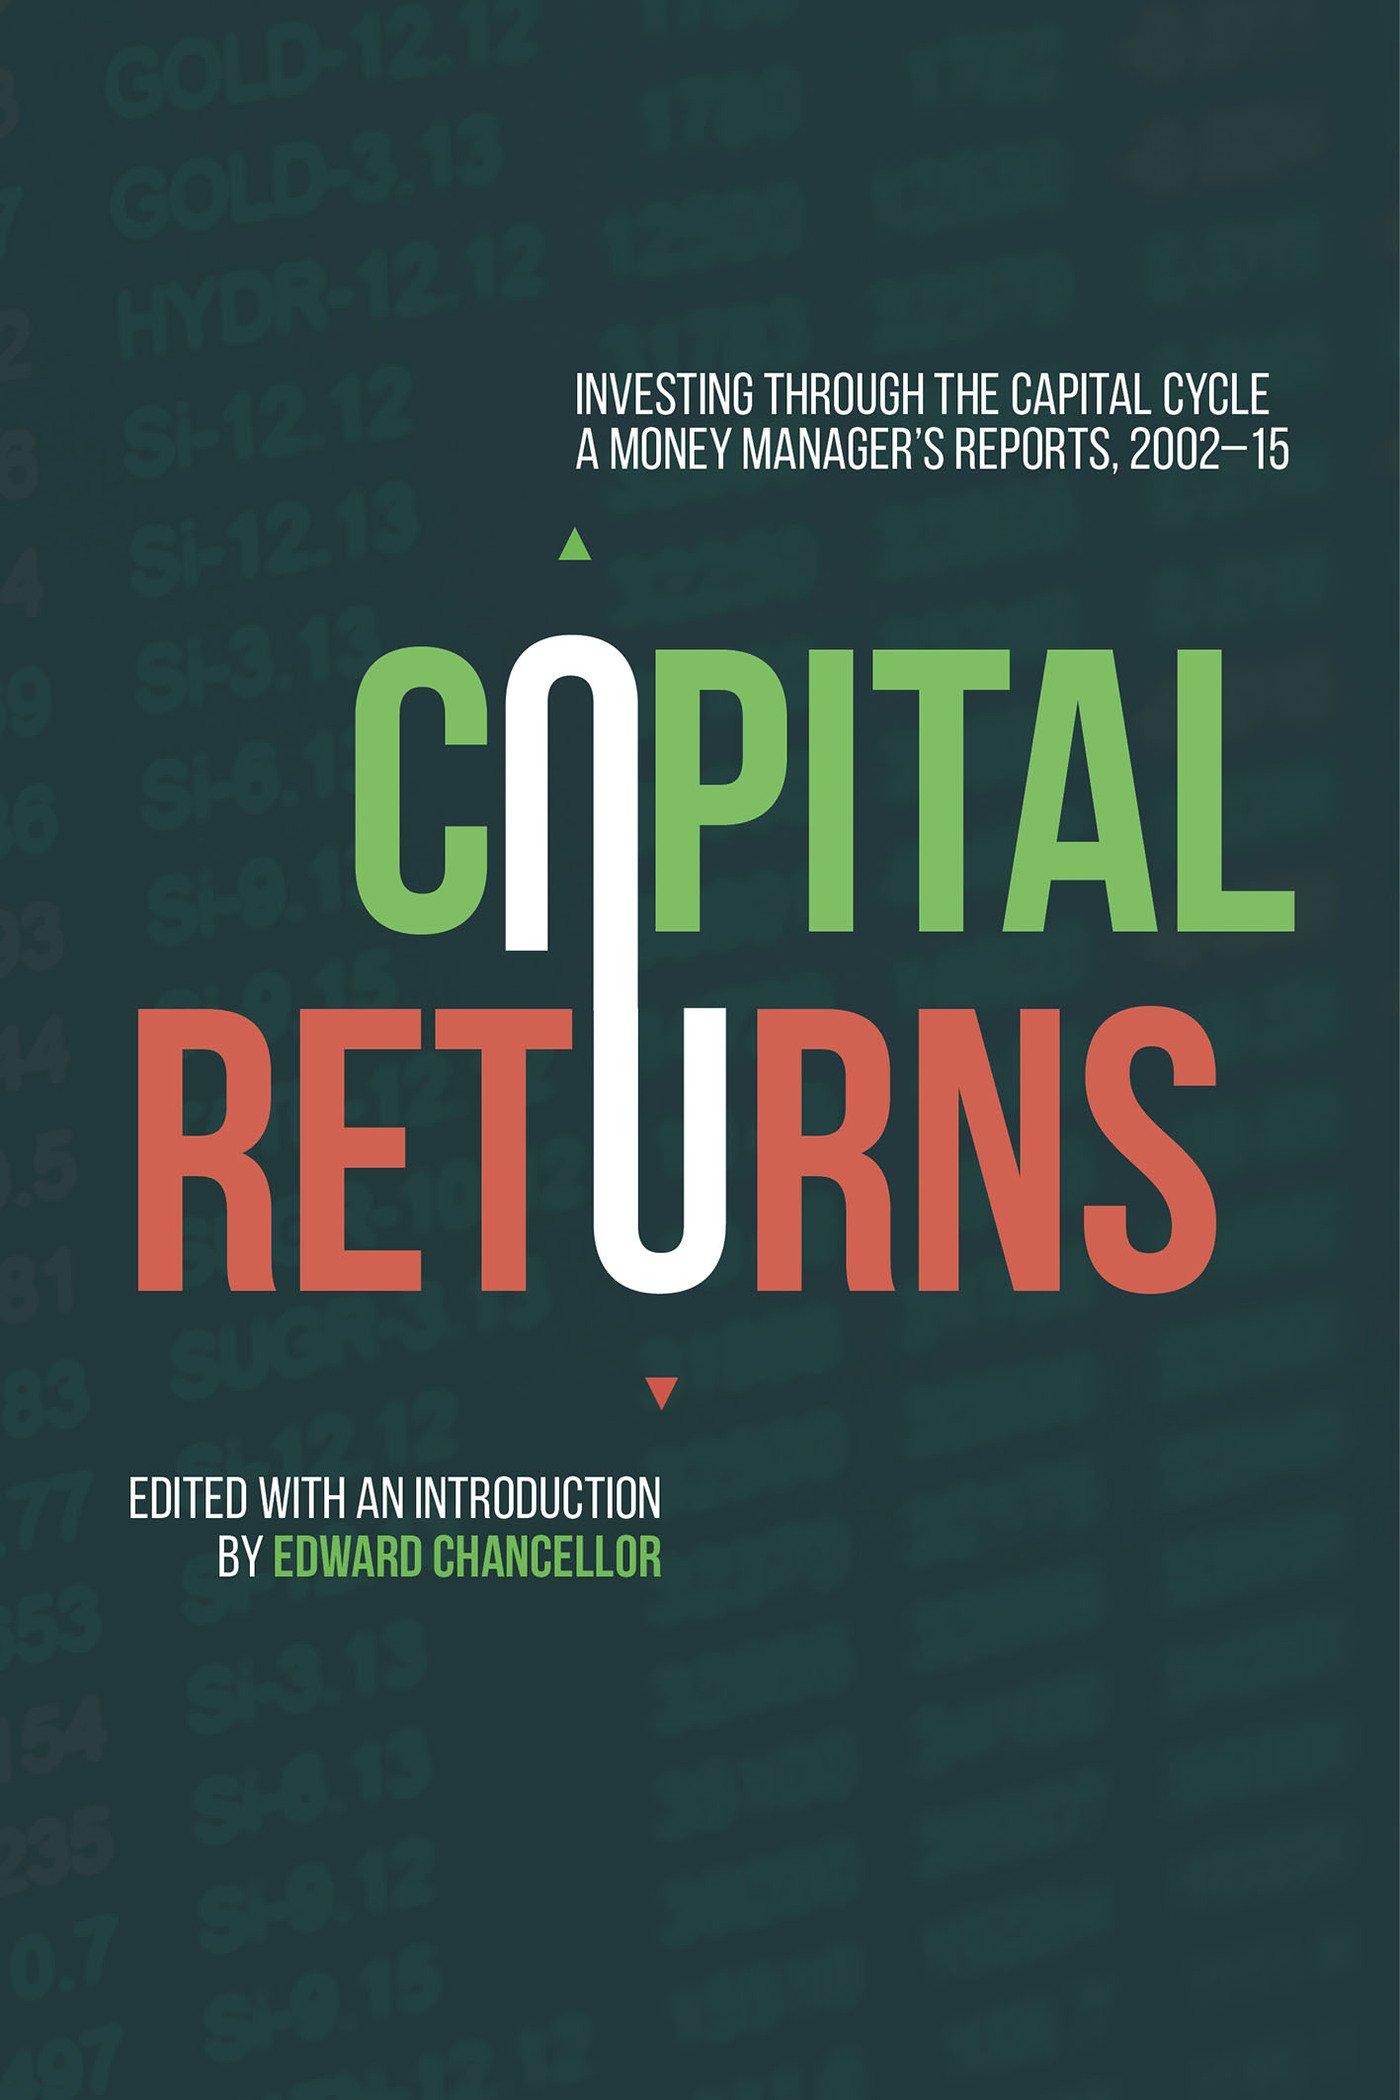 capital returns investing through the capital cycle a money managers reports 2002-15 1st edition edward